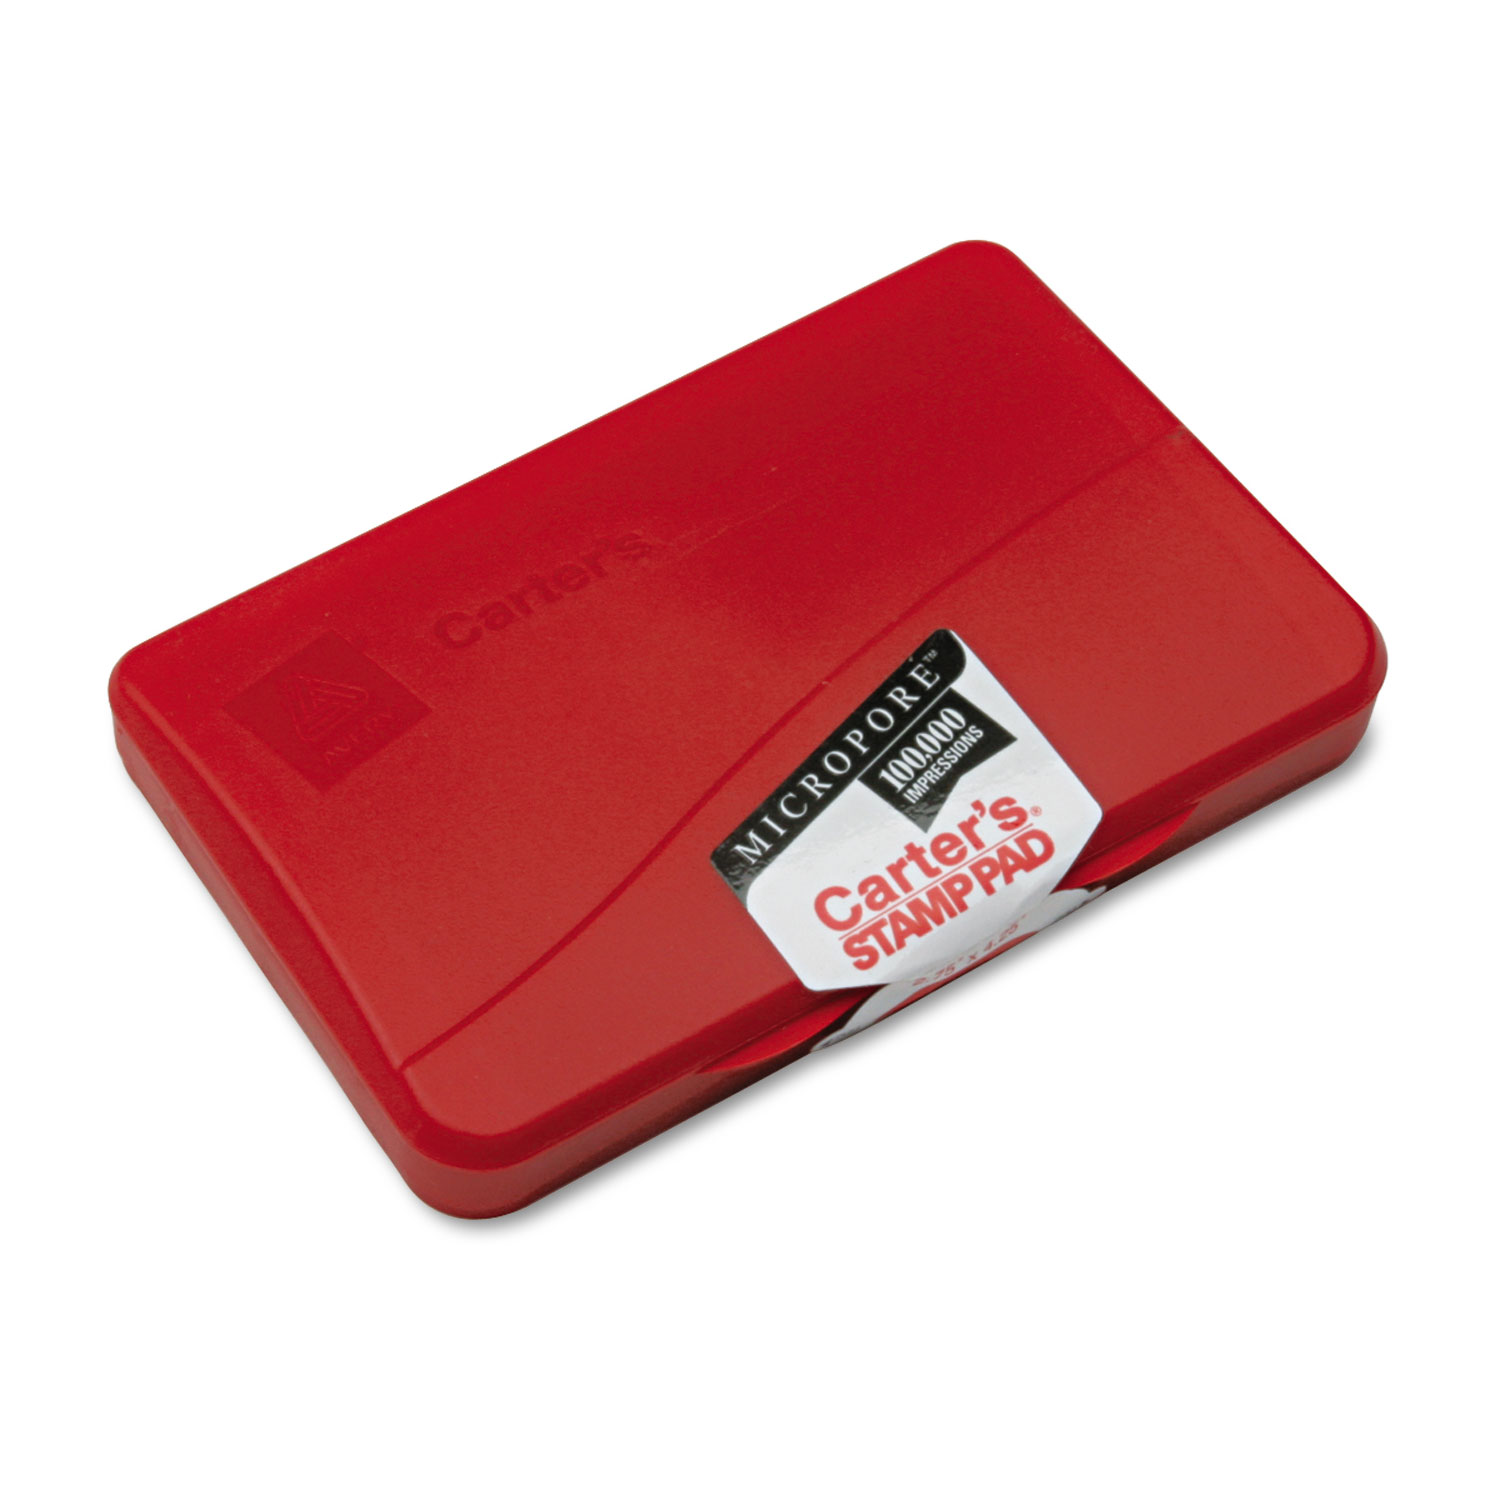  Carter's 21271 Micropore Stamp Pad, 4 1/4 x 2 3/4, Red (AVE21271) 